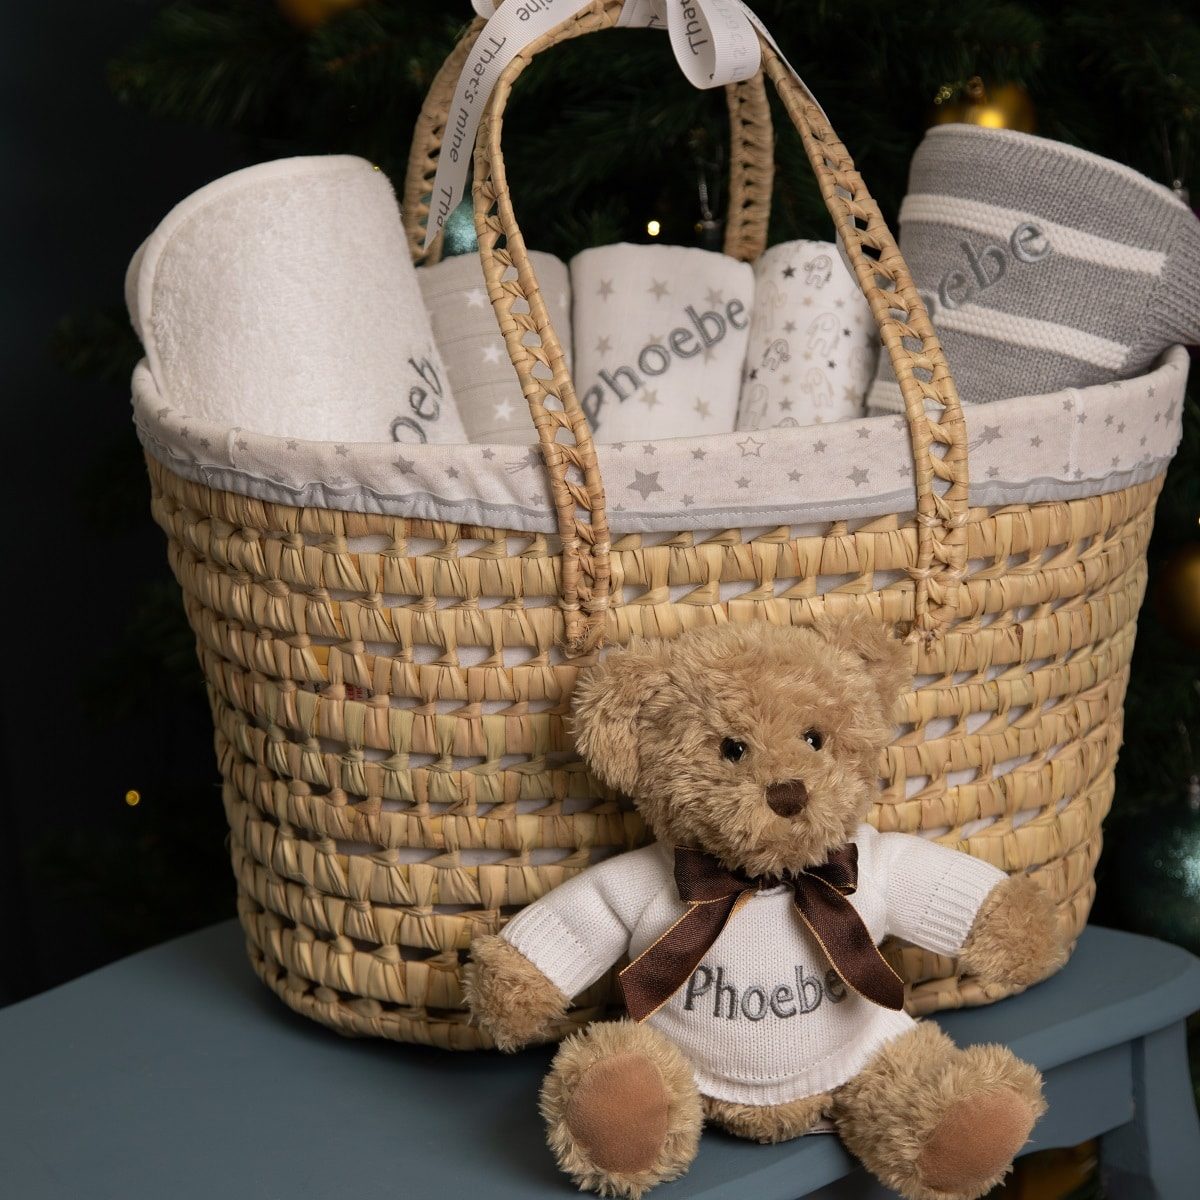 Personalised white and grey baby gift basket with sherwood bear soft toy